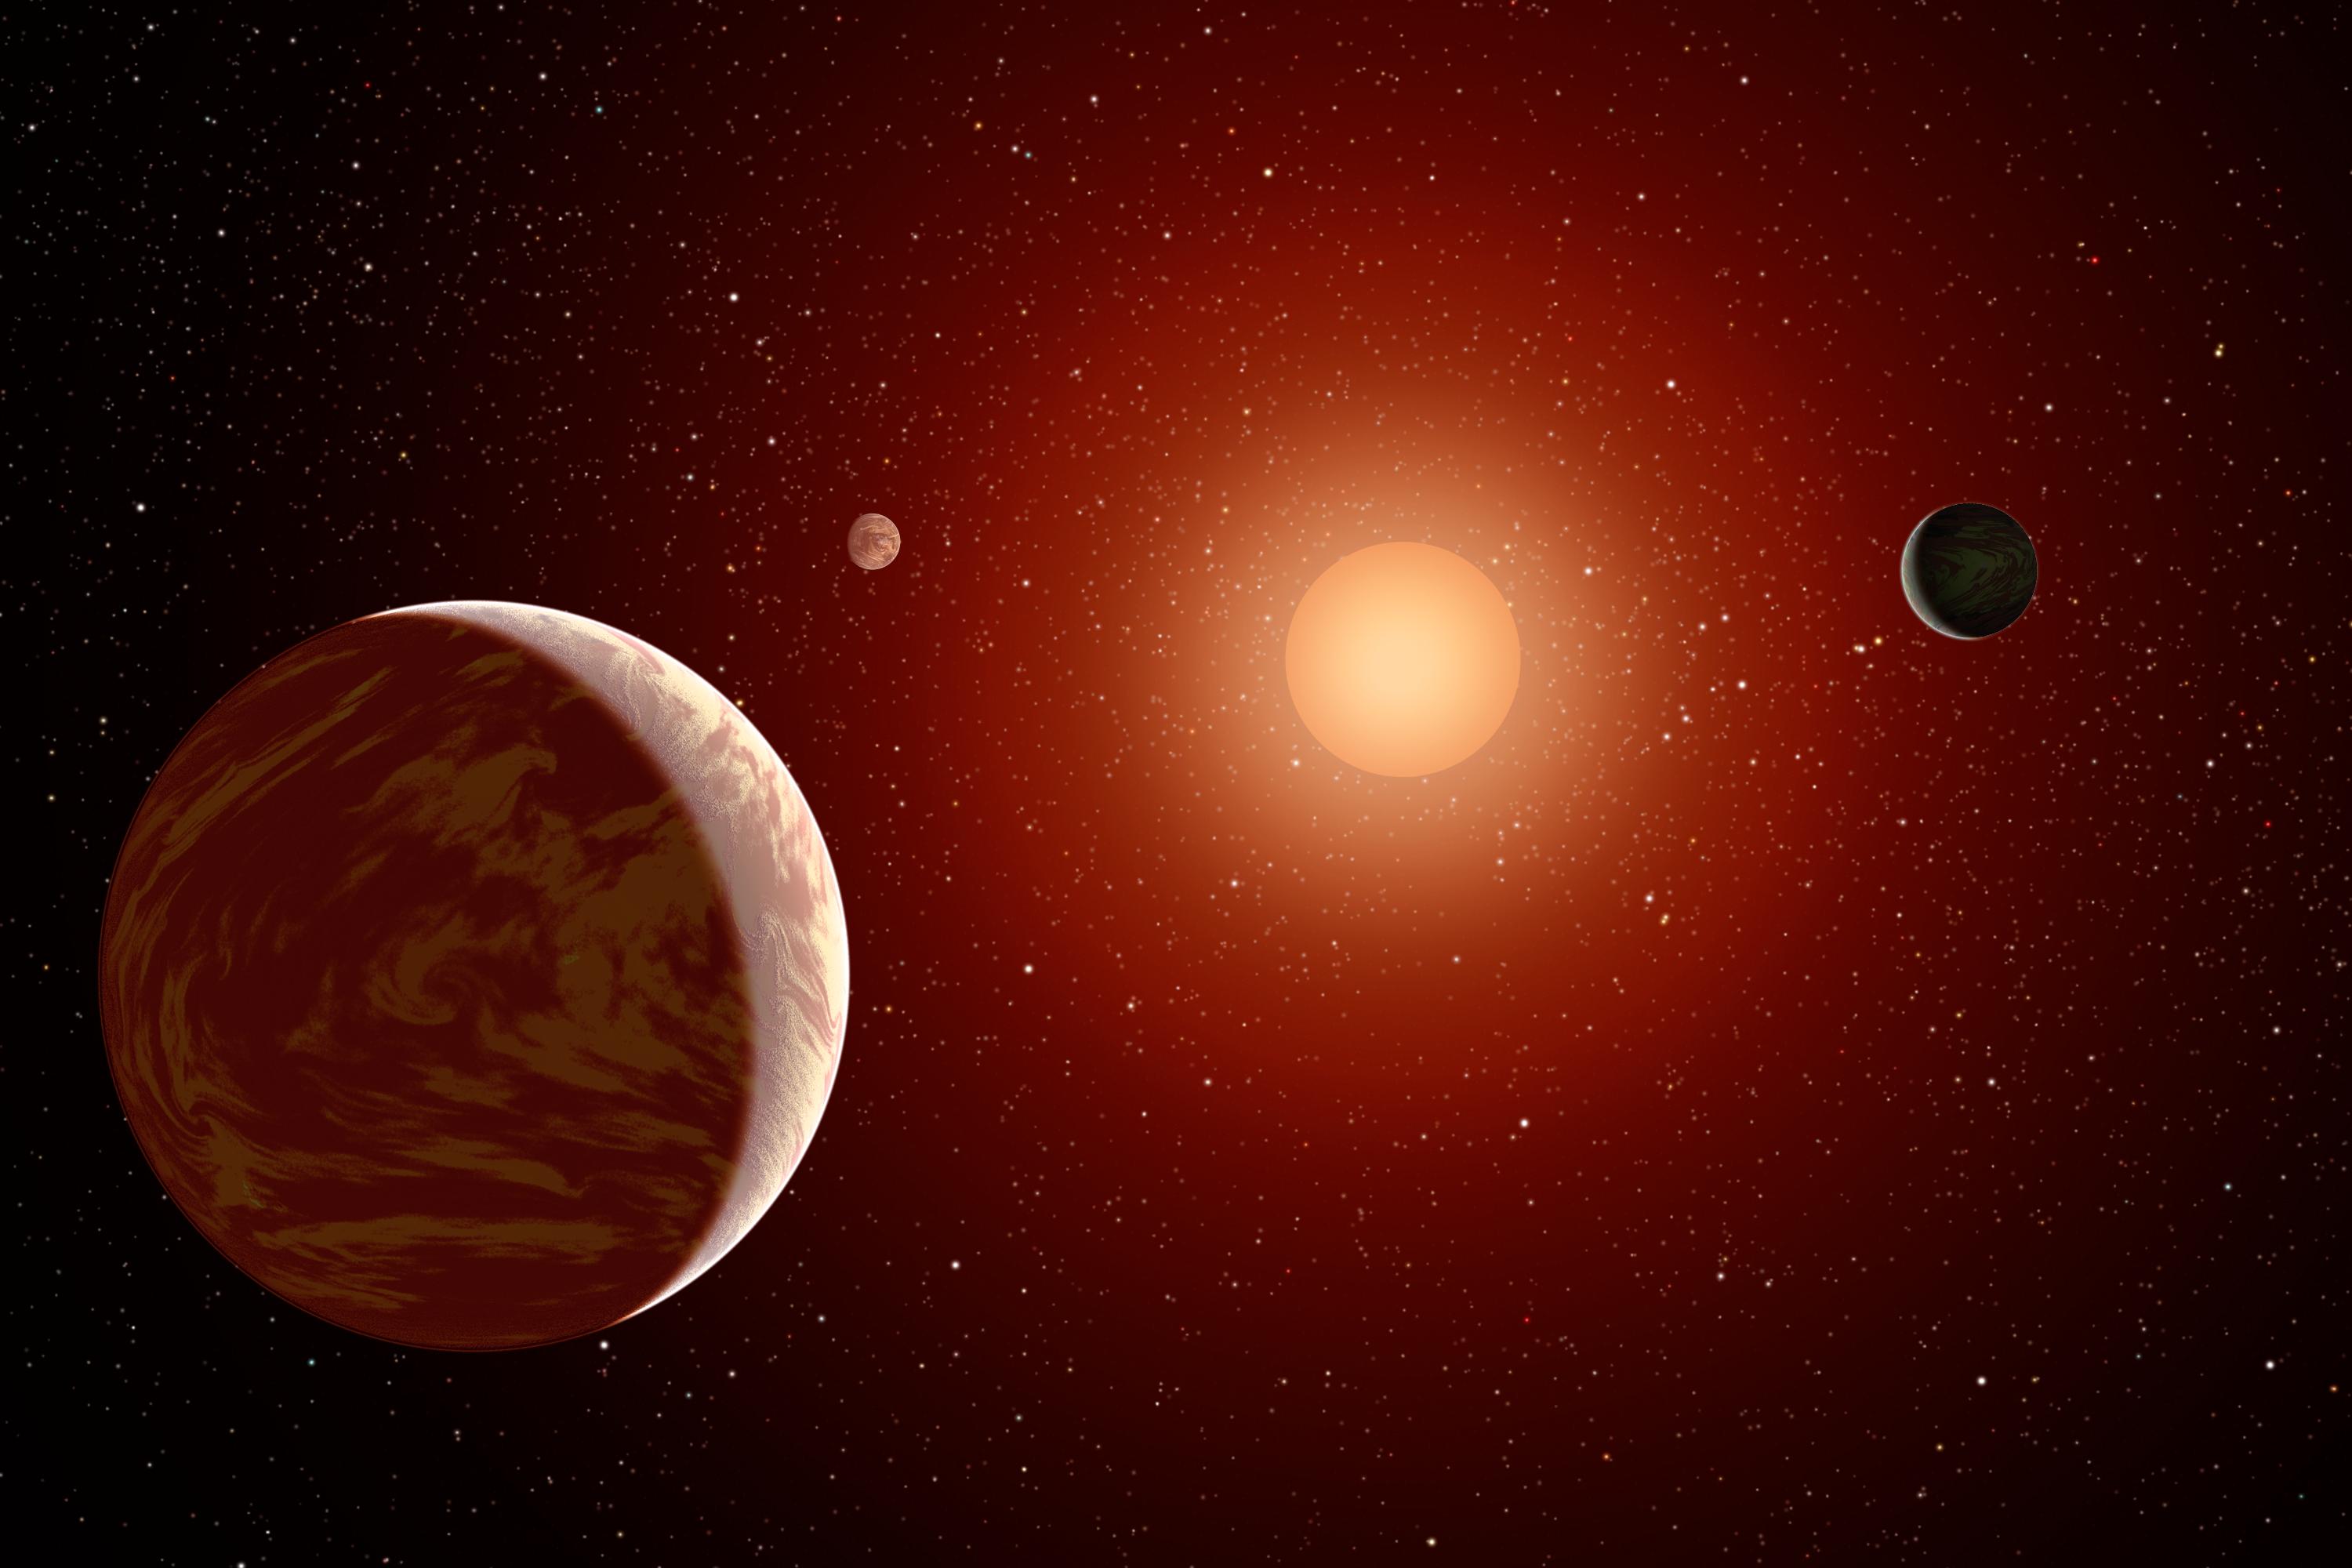 An artist’s conception of a red dwarf star with three orbiting planets.